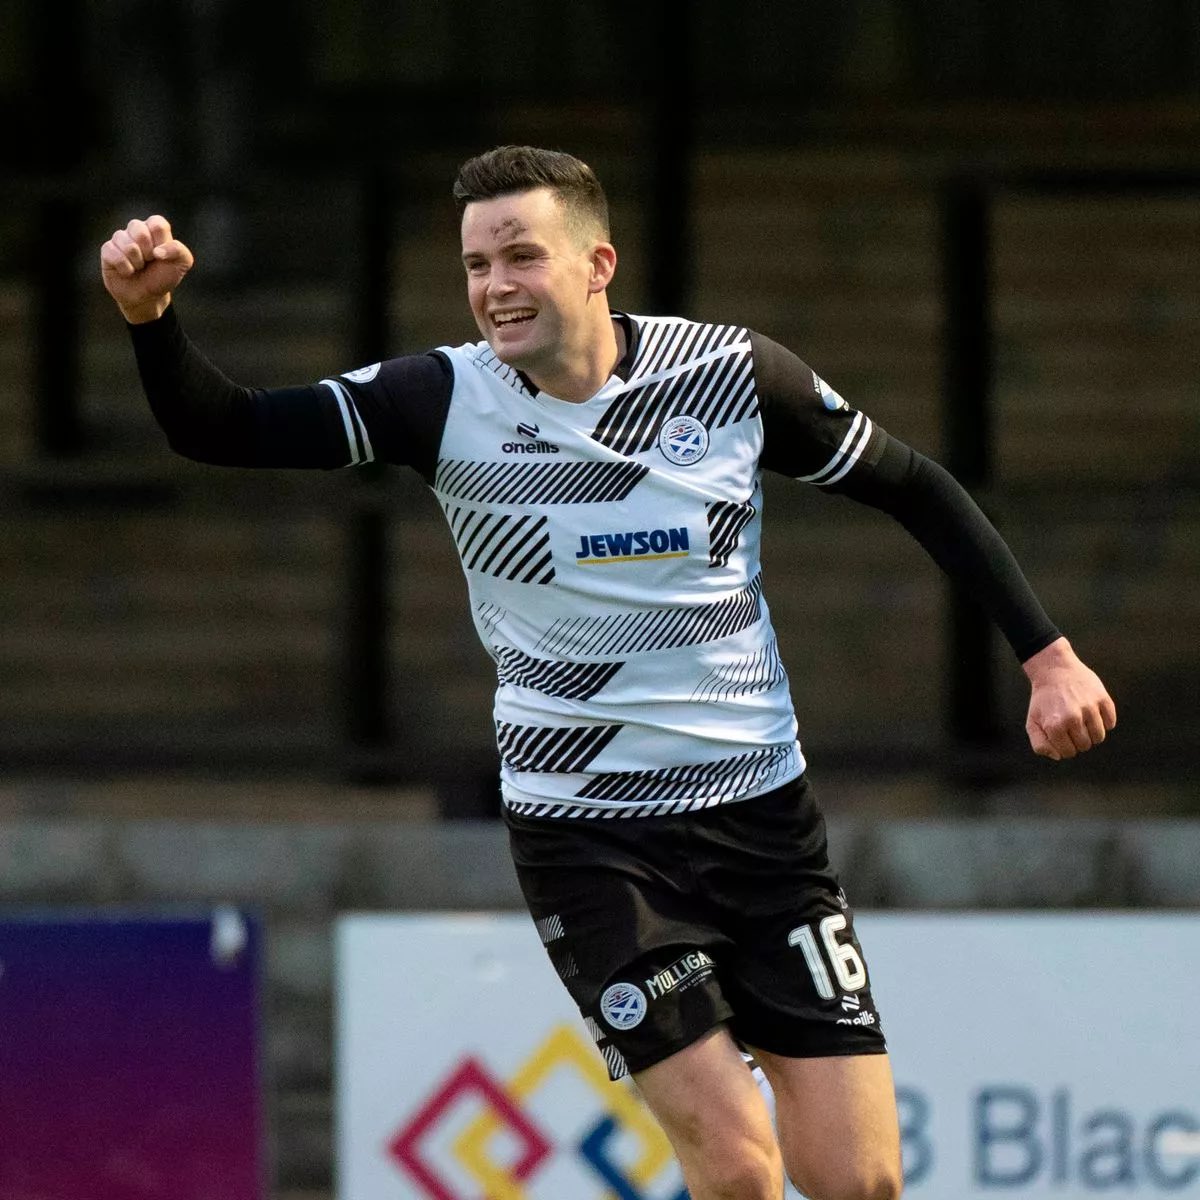 🏆 𝗣𝗹𝗮𝘆𝗲𝗿 𝗼𝗳 𝘁𝗵𝗲 𝗿𝗼𝘂𝗻𝗱 Following a goal and an assist against Arbroath, Anton Dowds is Player of the round! It was close, but after two polls he’s won it with 60% of votes. Congratulations @Antondowds 👏